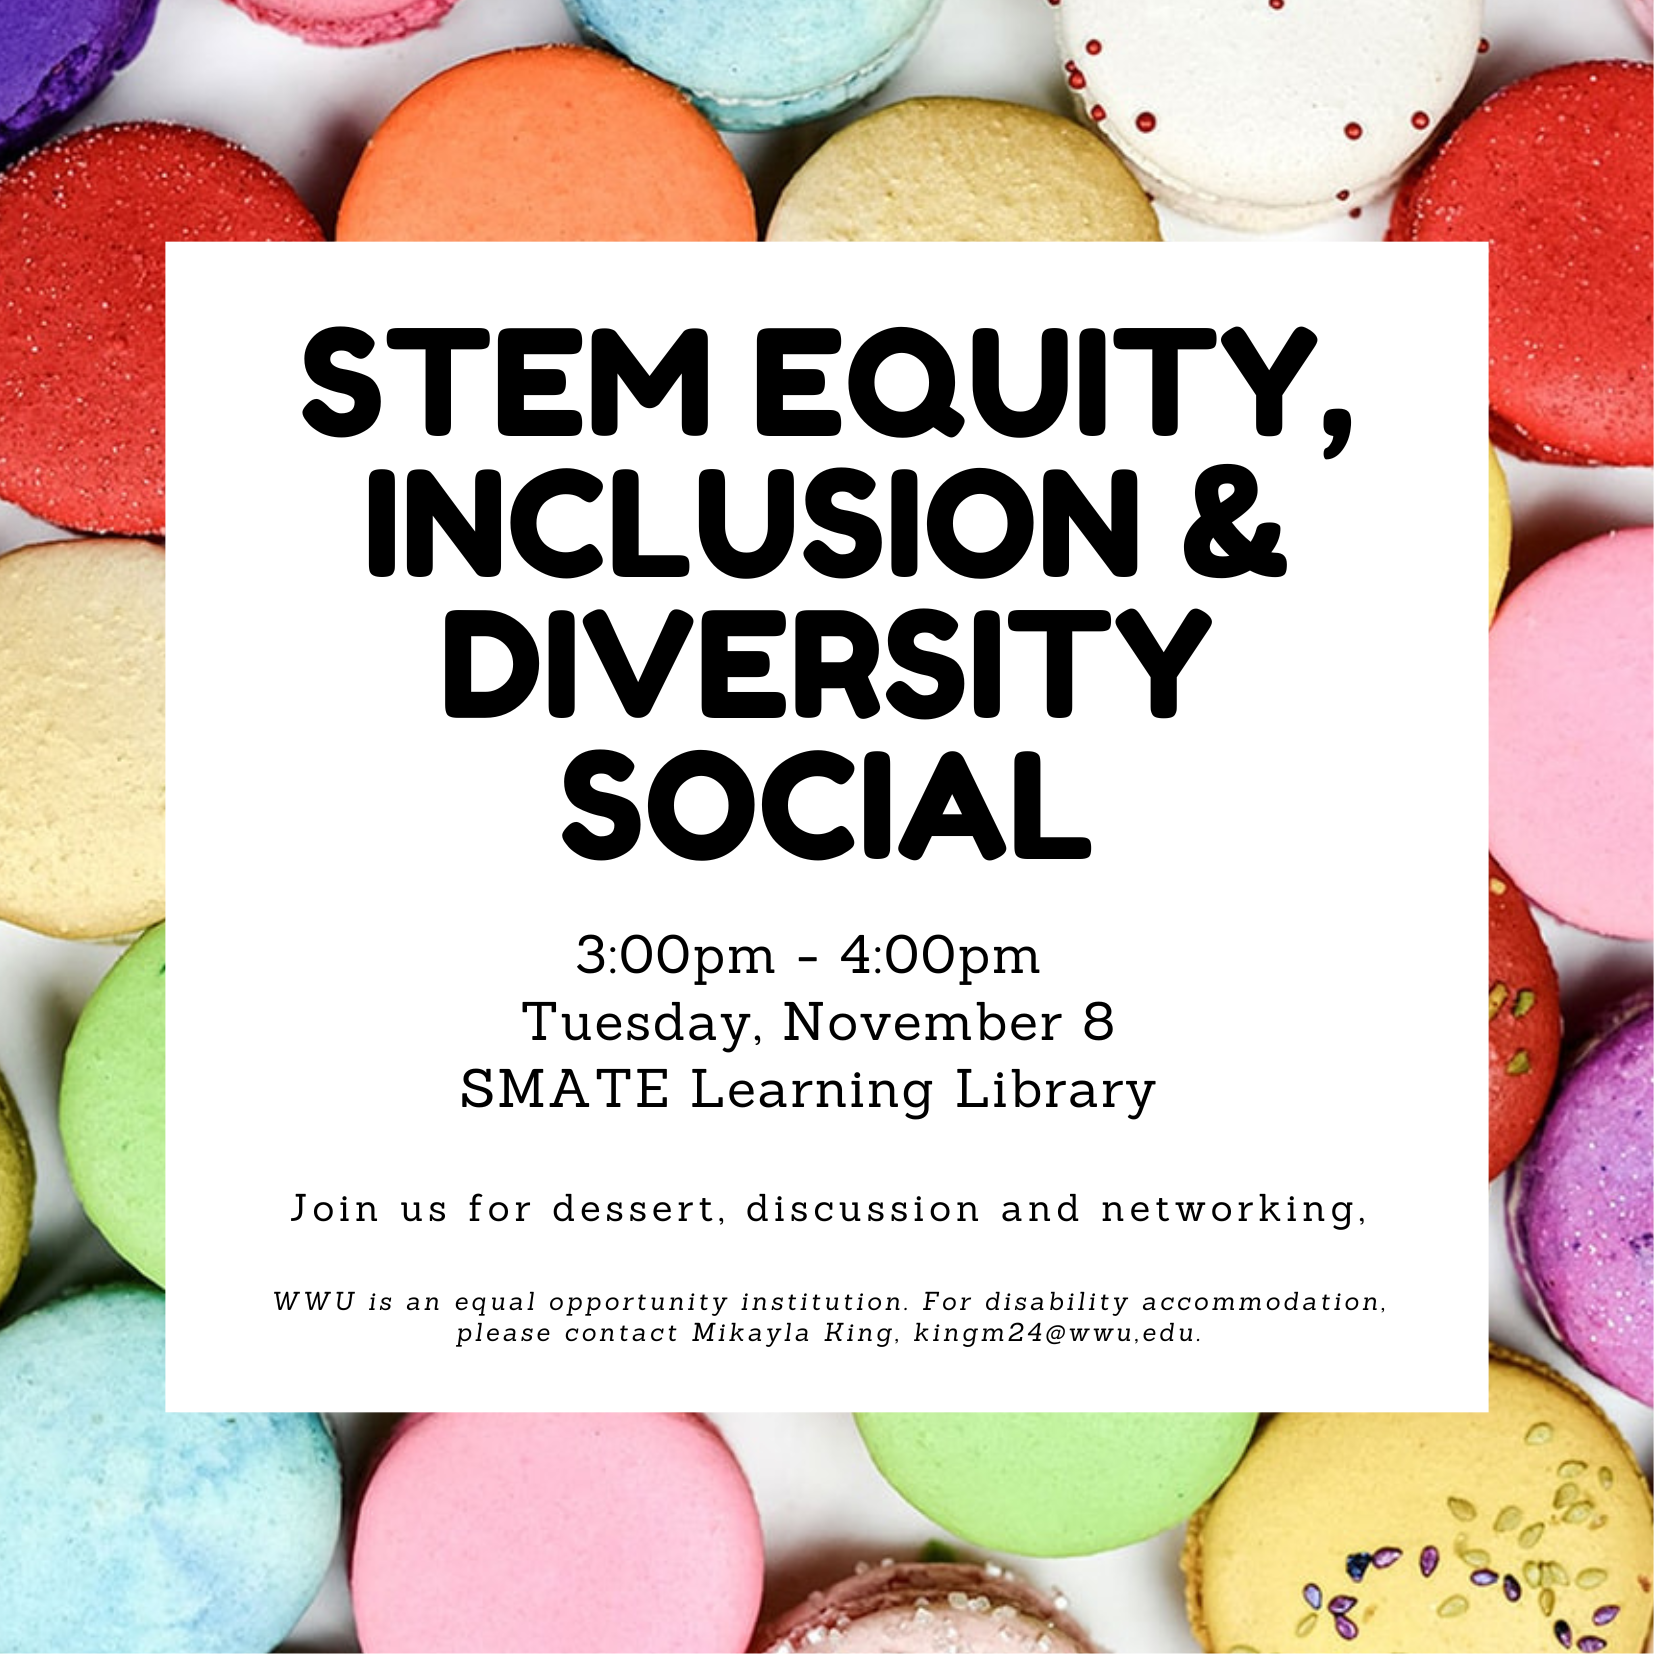 Please join us for the STEM Equity, Inclusion & Diversity Social on Tuesday, Nov. 8 from 3-4pm in the SMATE Learning Library (SL 220). There will be dessert, discussion, and networking.  WWU is an equal opportunity institution. For disability accommodation, please contact Mikayla King, kingm24@wwu.edu